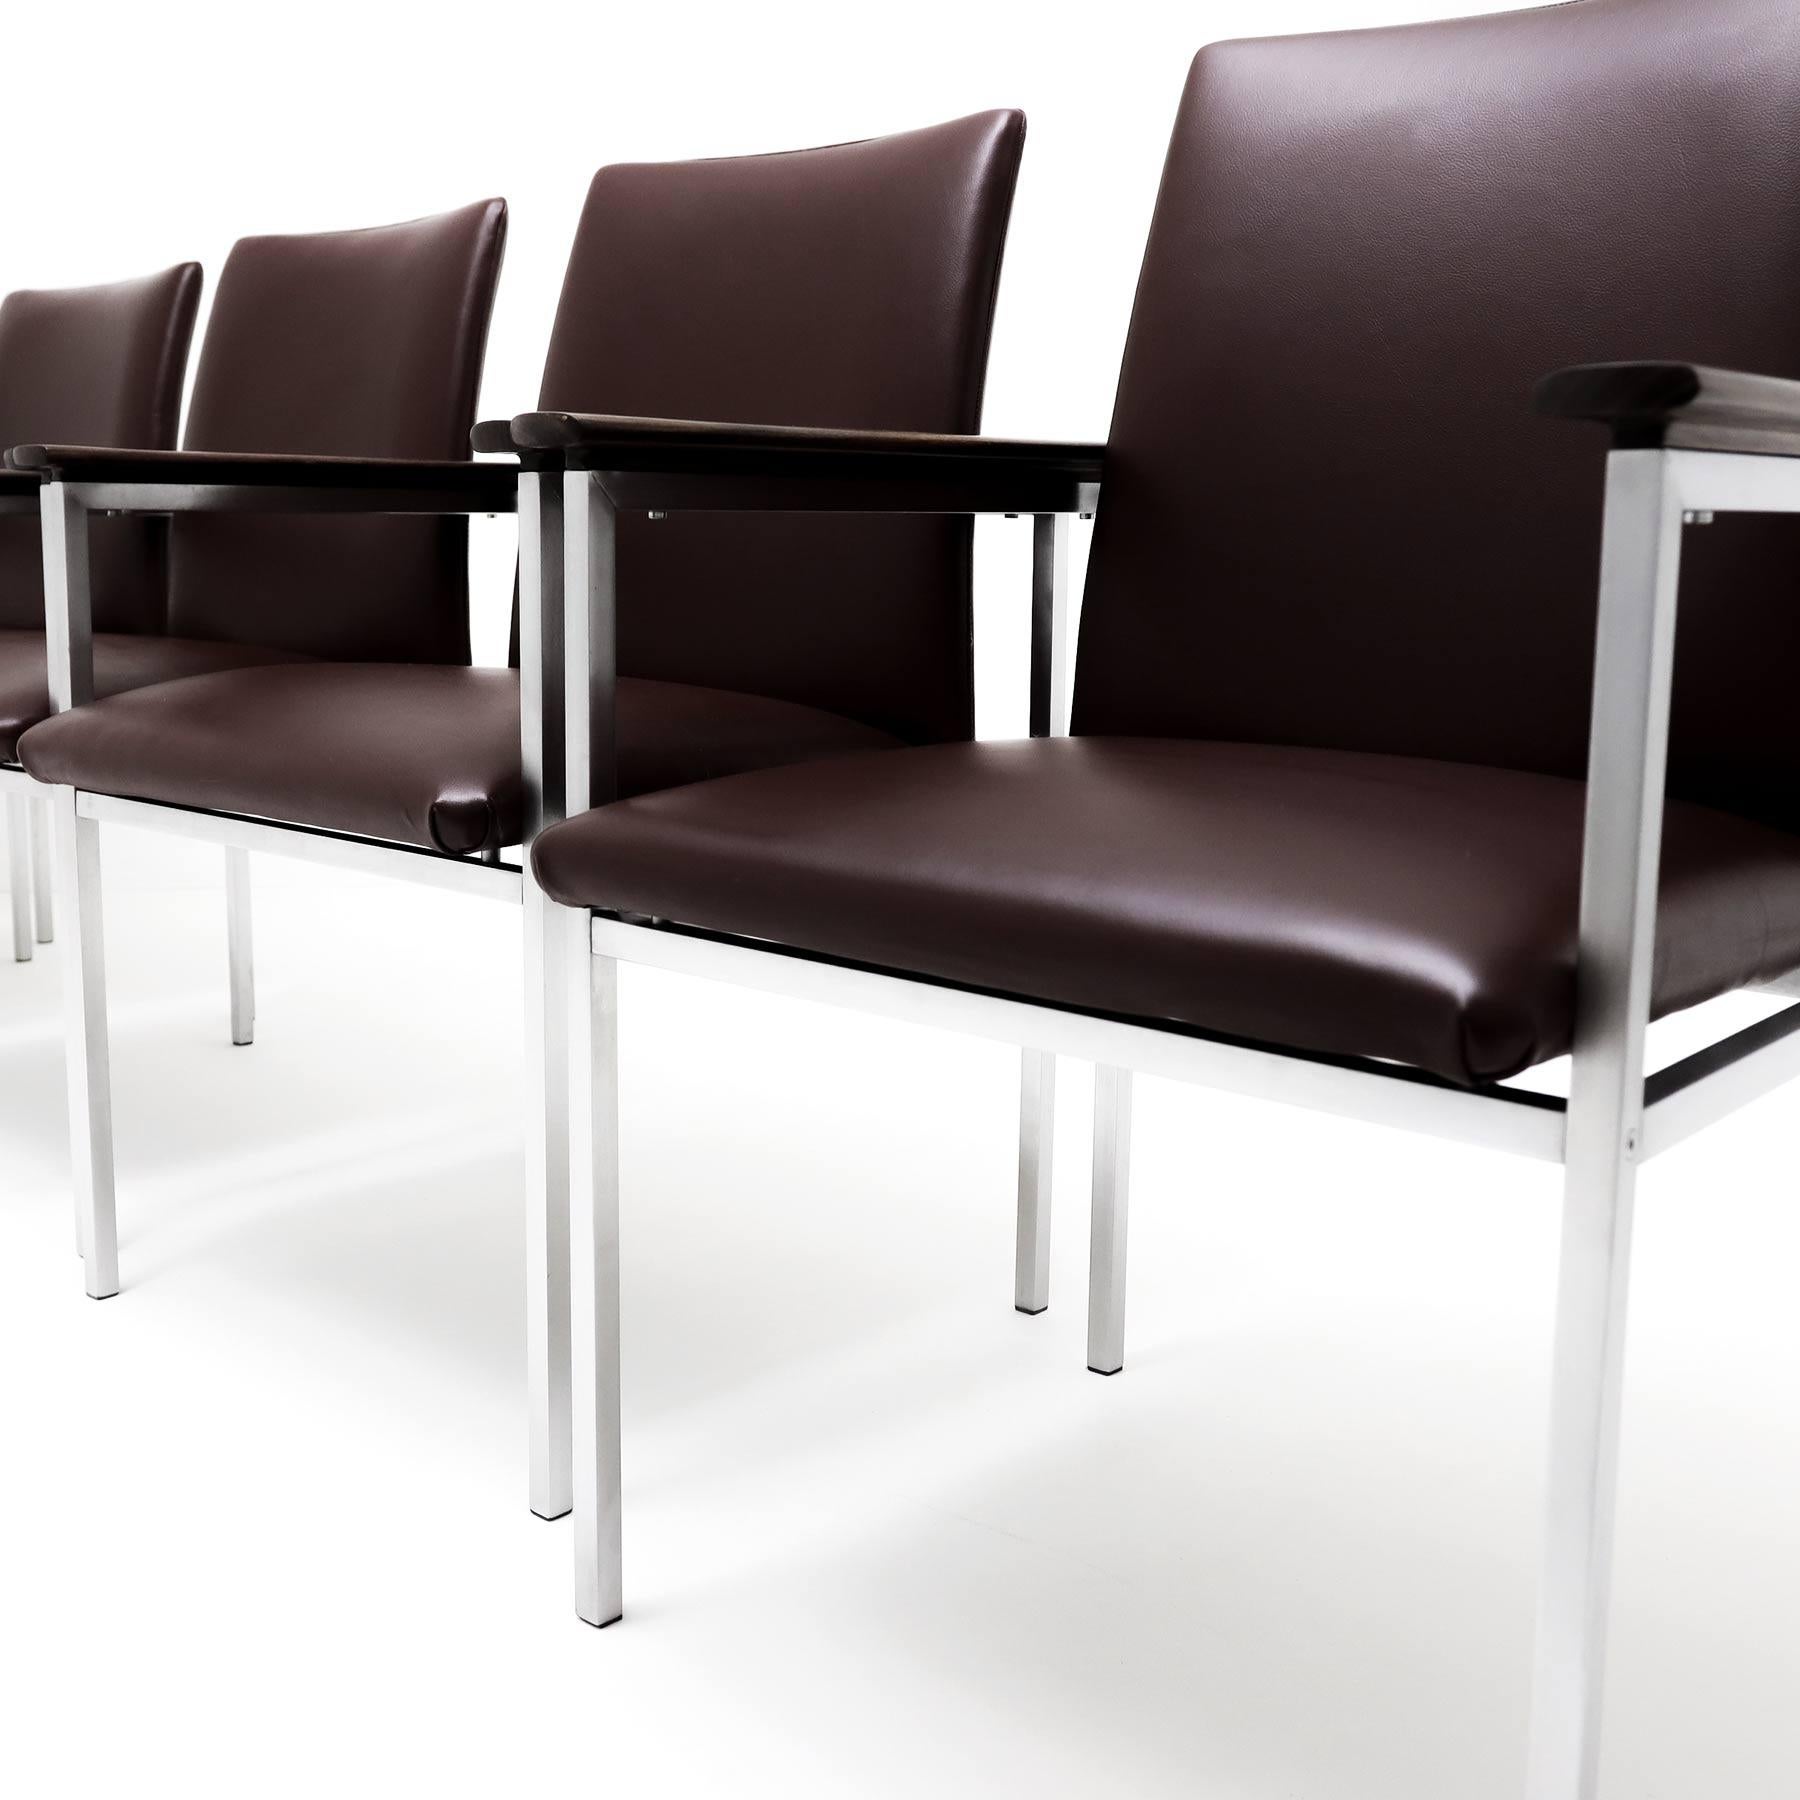 6 Sigvard Bernadotte H-line chairs in brushed steel, Walnut and leather For Sale 3